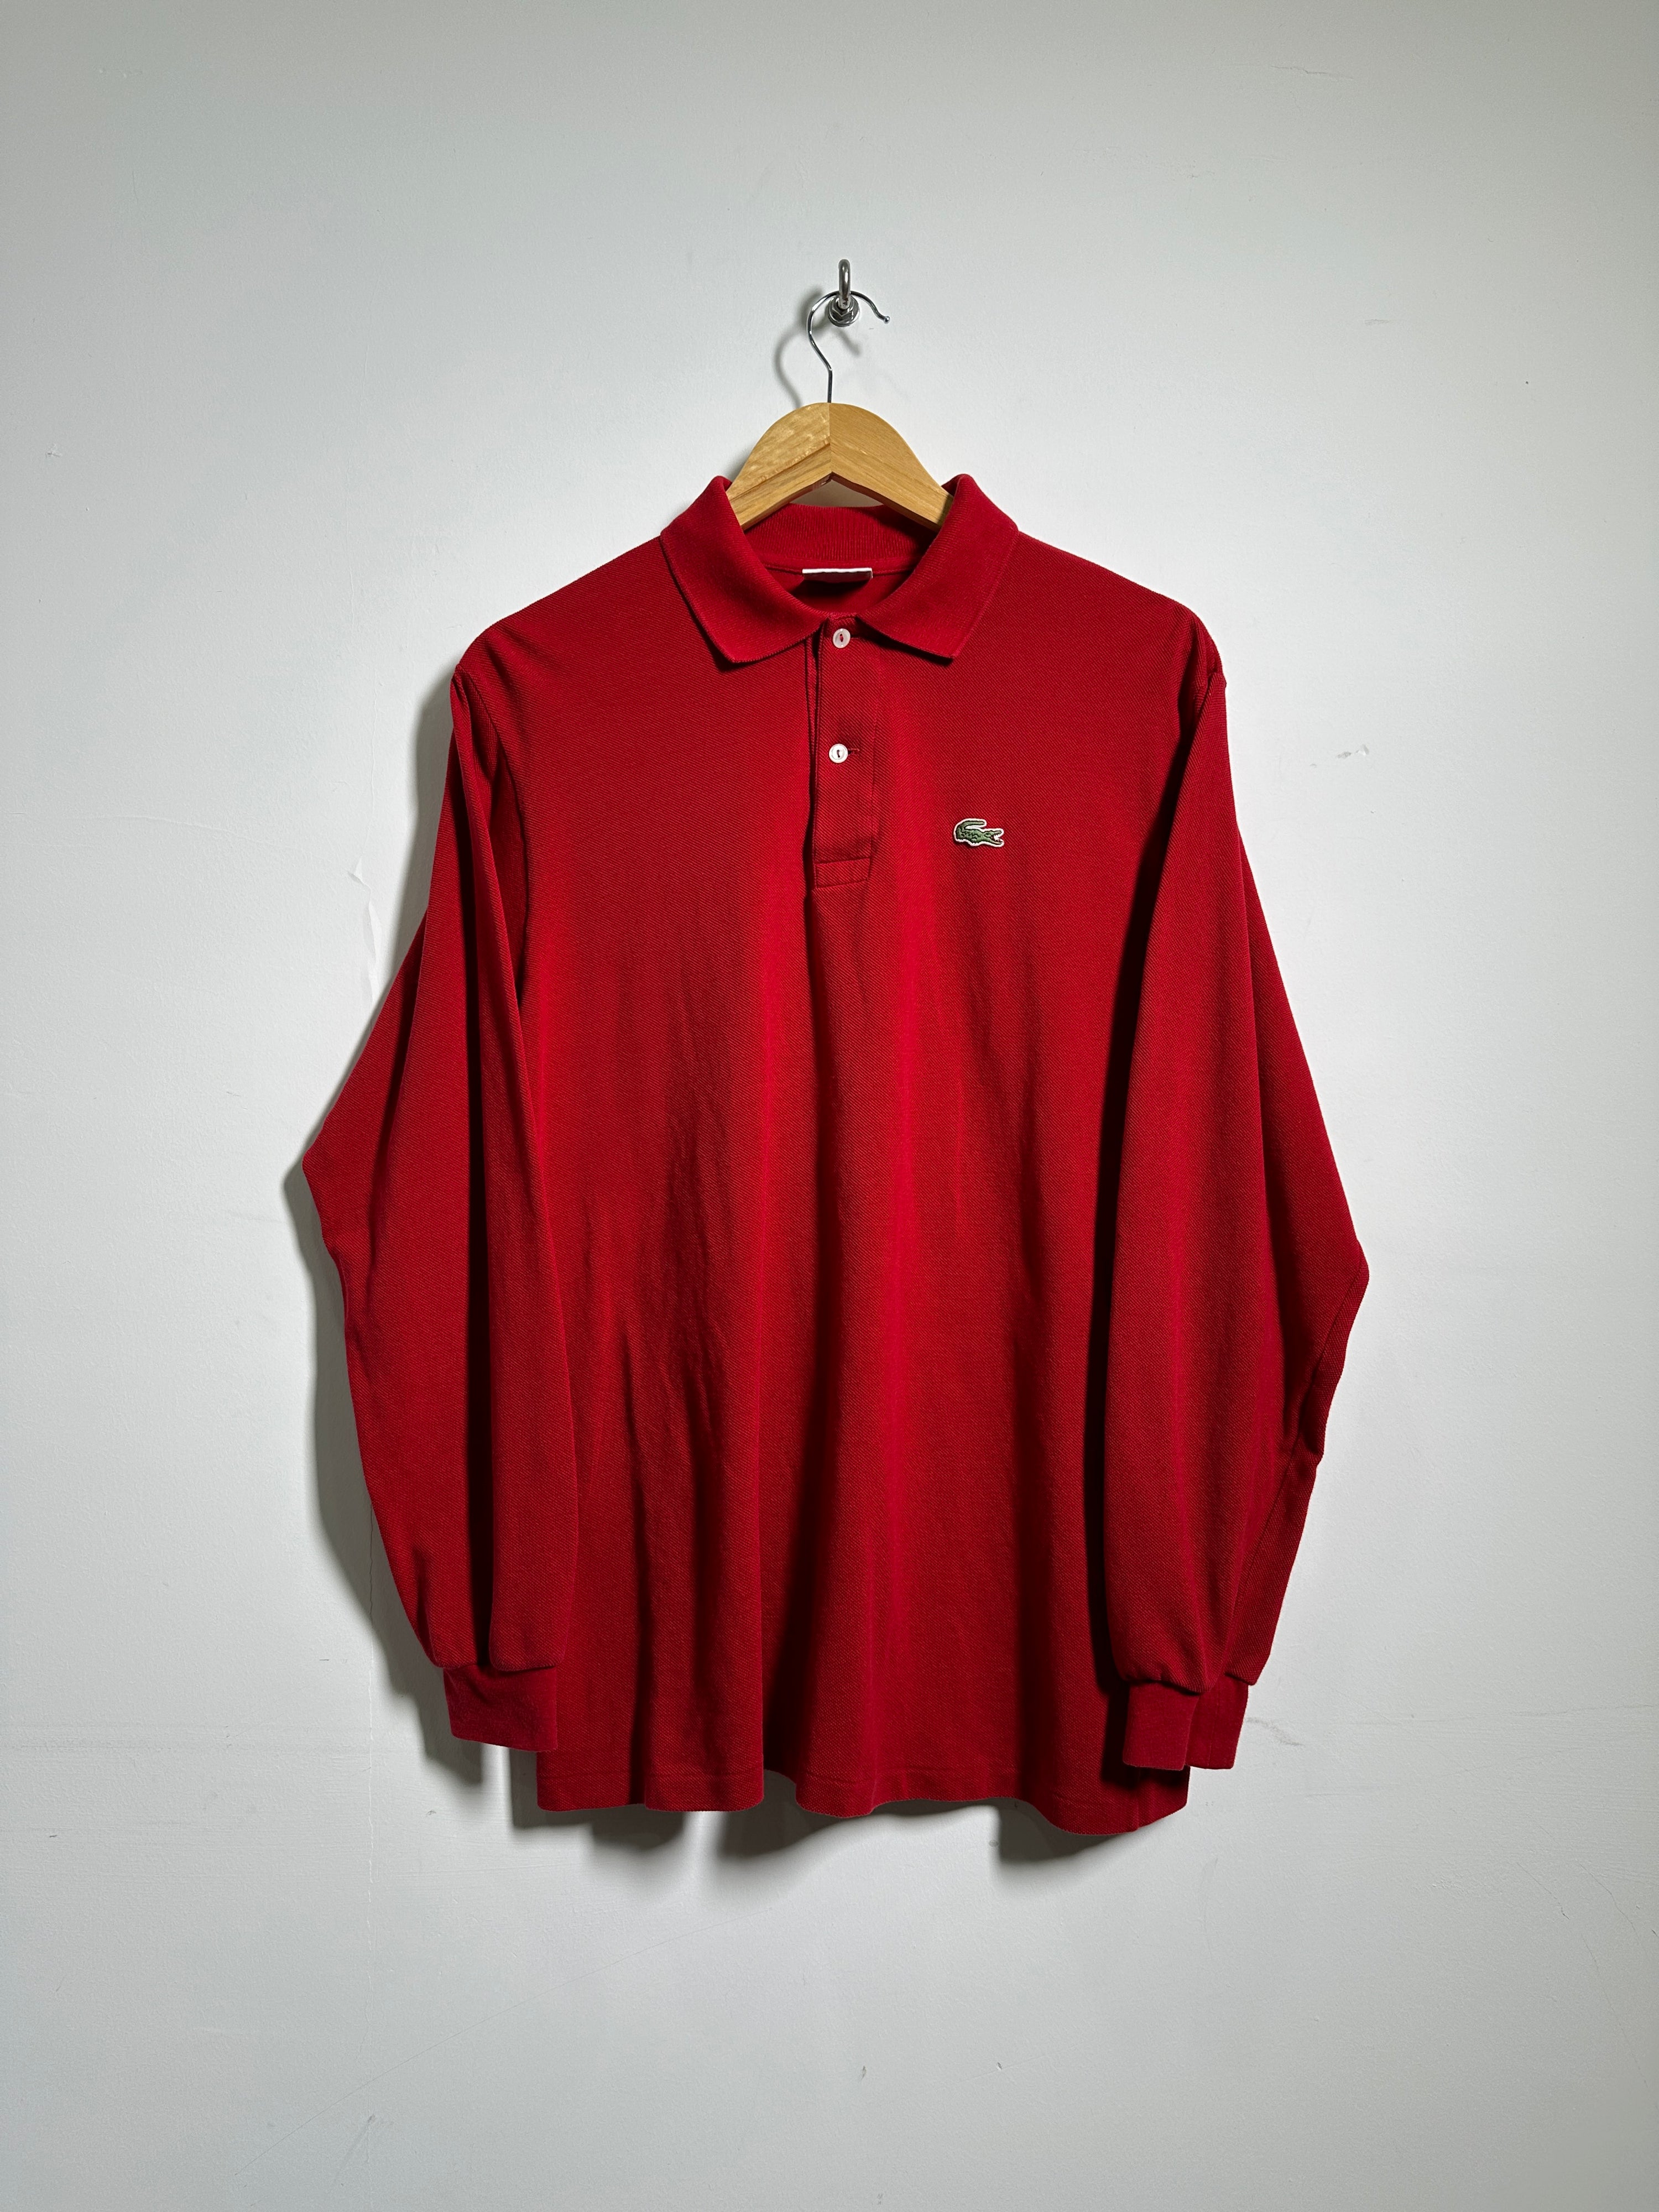 LACOSTE long-sleeve poloshirt in red